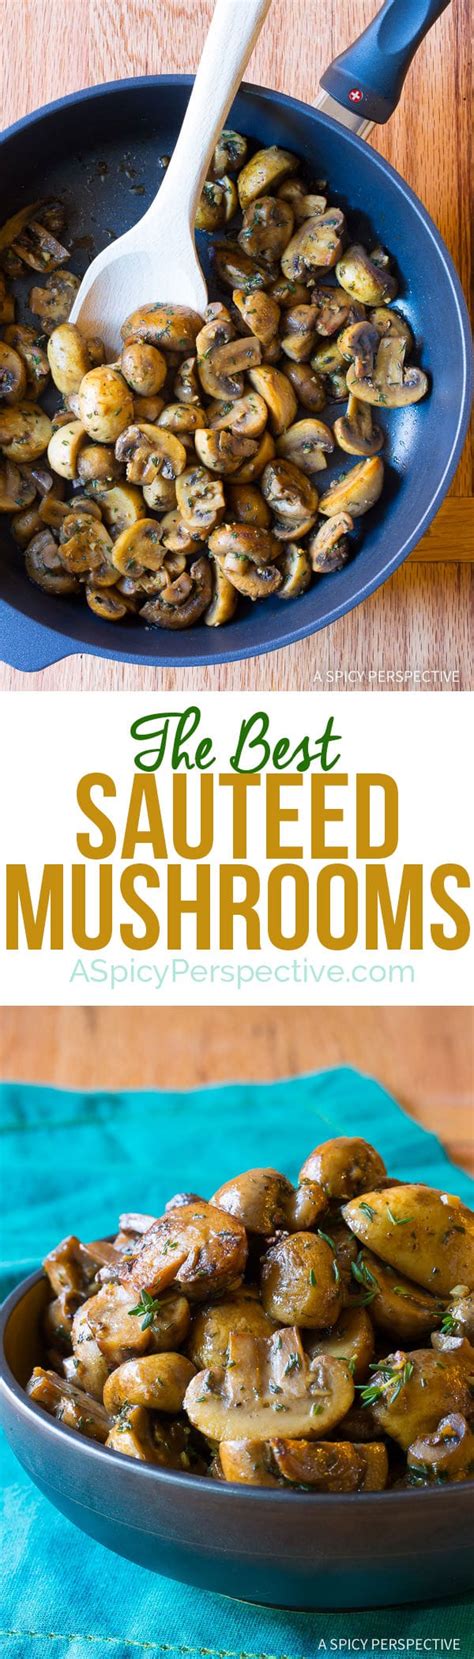 The Best Sauteed Mushroom Recipe - A Spicy Perspective